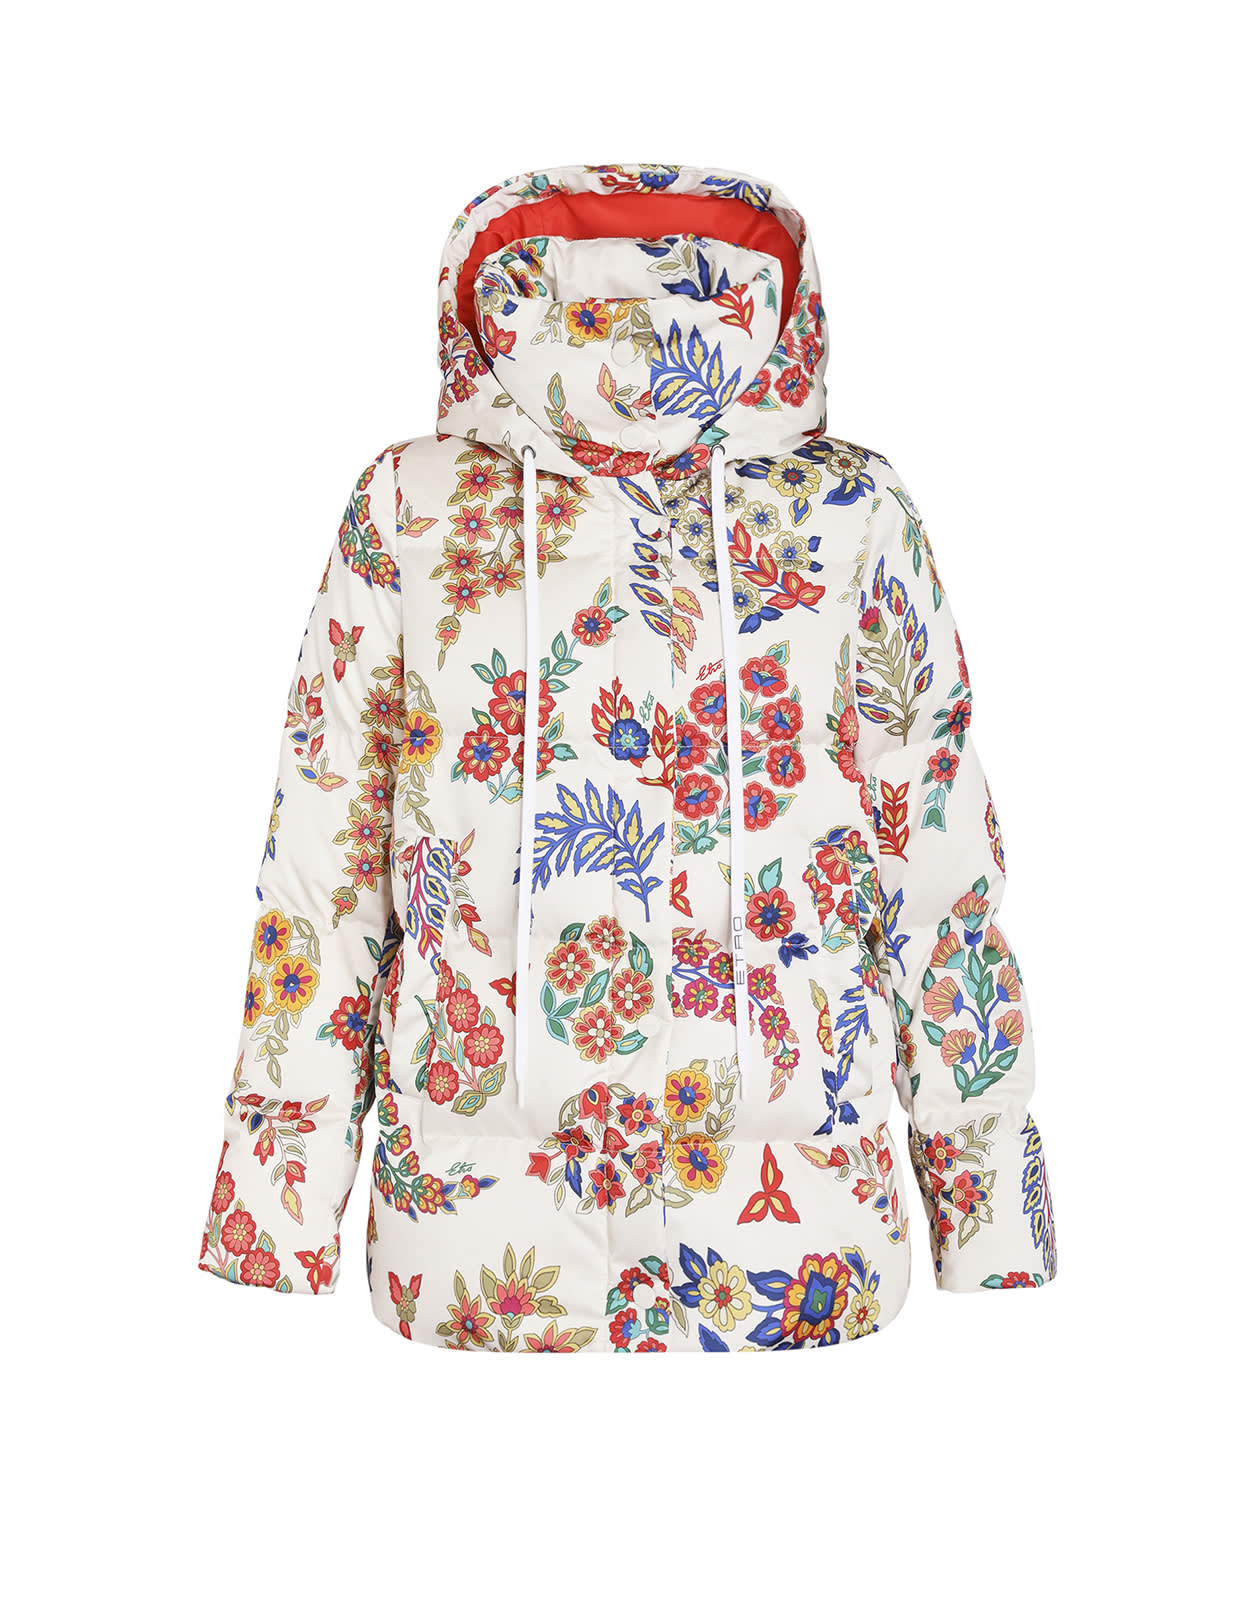 Etro Woman Short Quilted Paisley Down Jacket